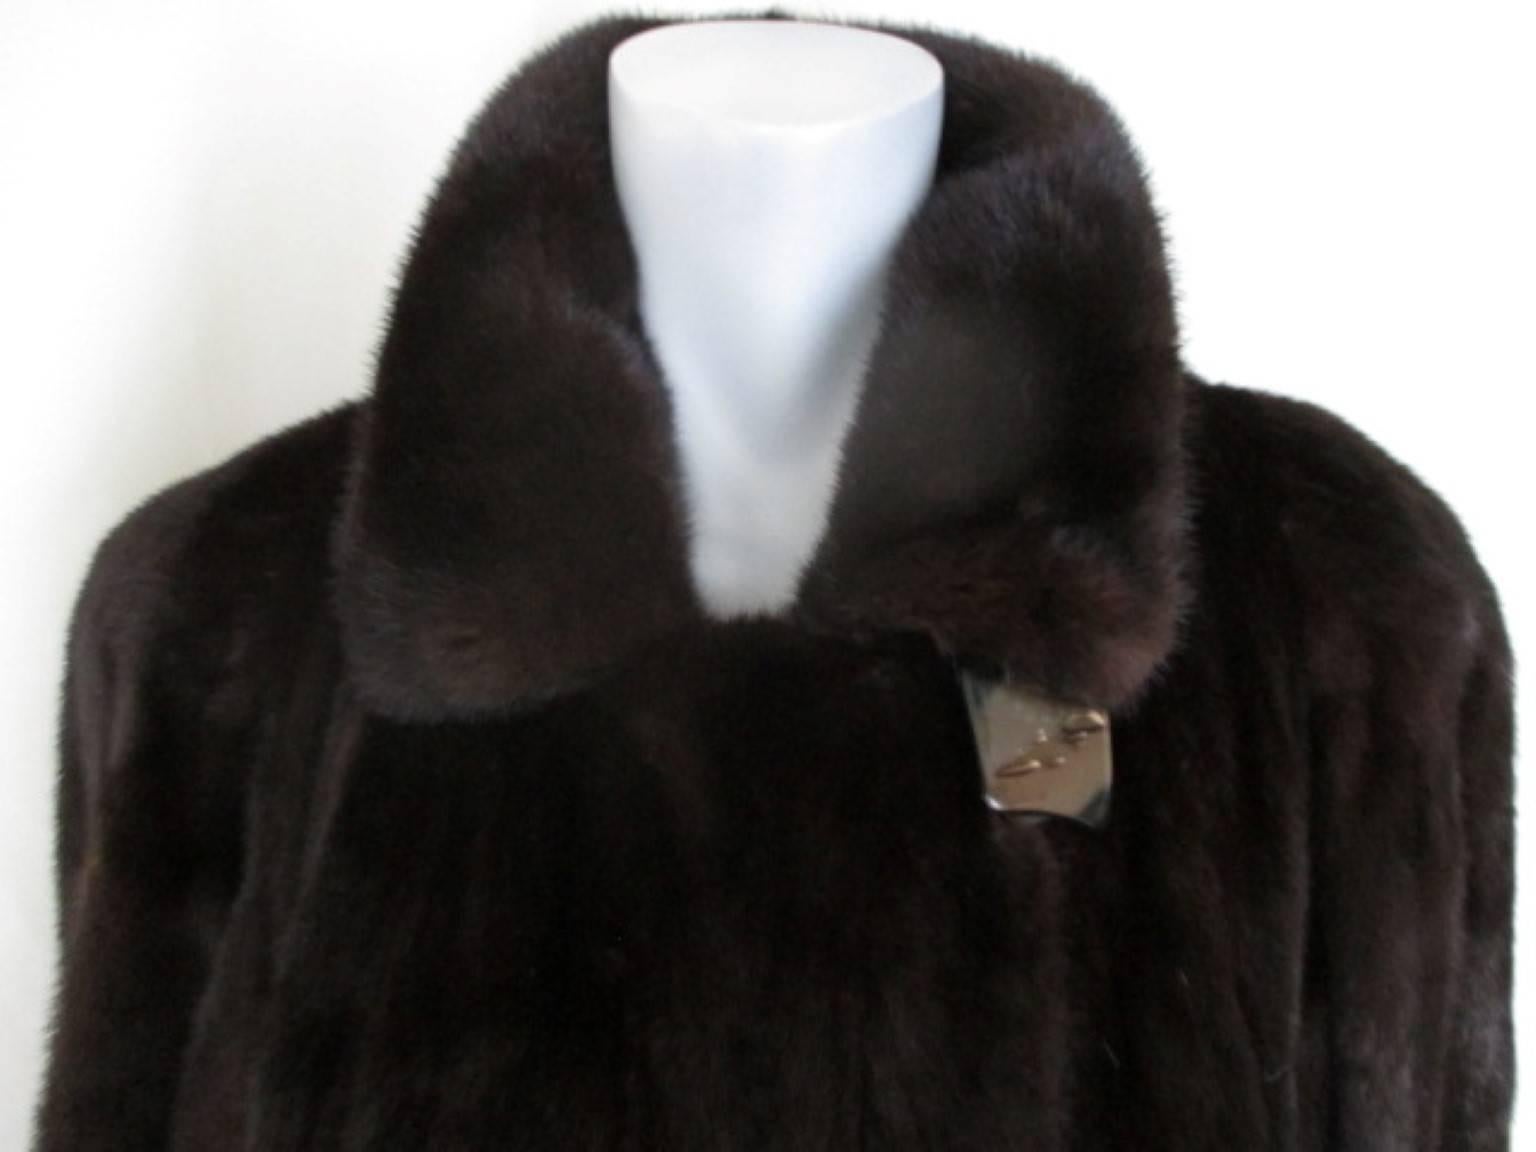 This dark brown coat is made of top quality mink in Canada.

We offer more exclusive fur items, see our frontstore.

Details:
It has 2 pockets, 1 inside pocket, 1 closing button at the collar and 4 closing hooks.
Furrier:  by the furrier house